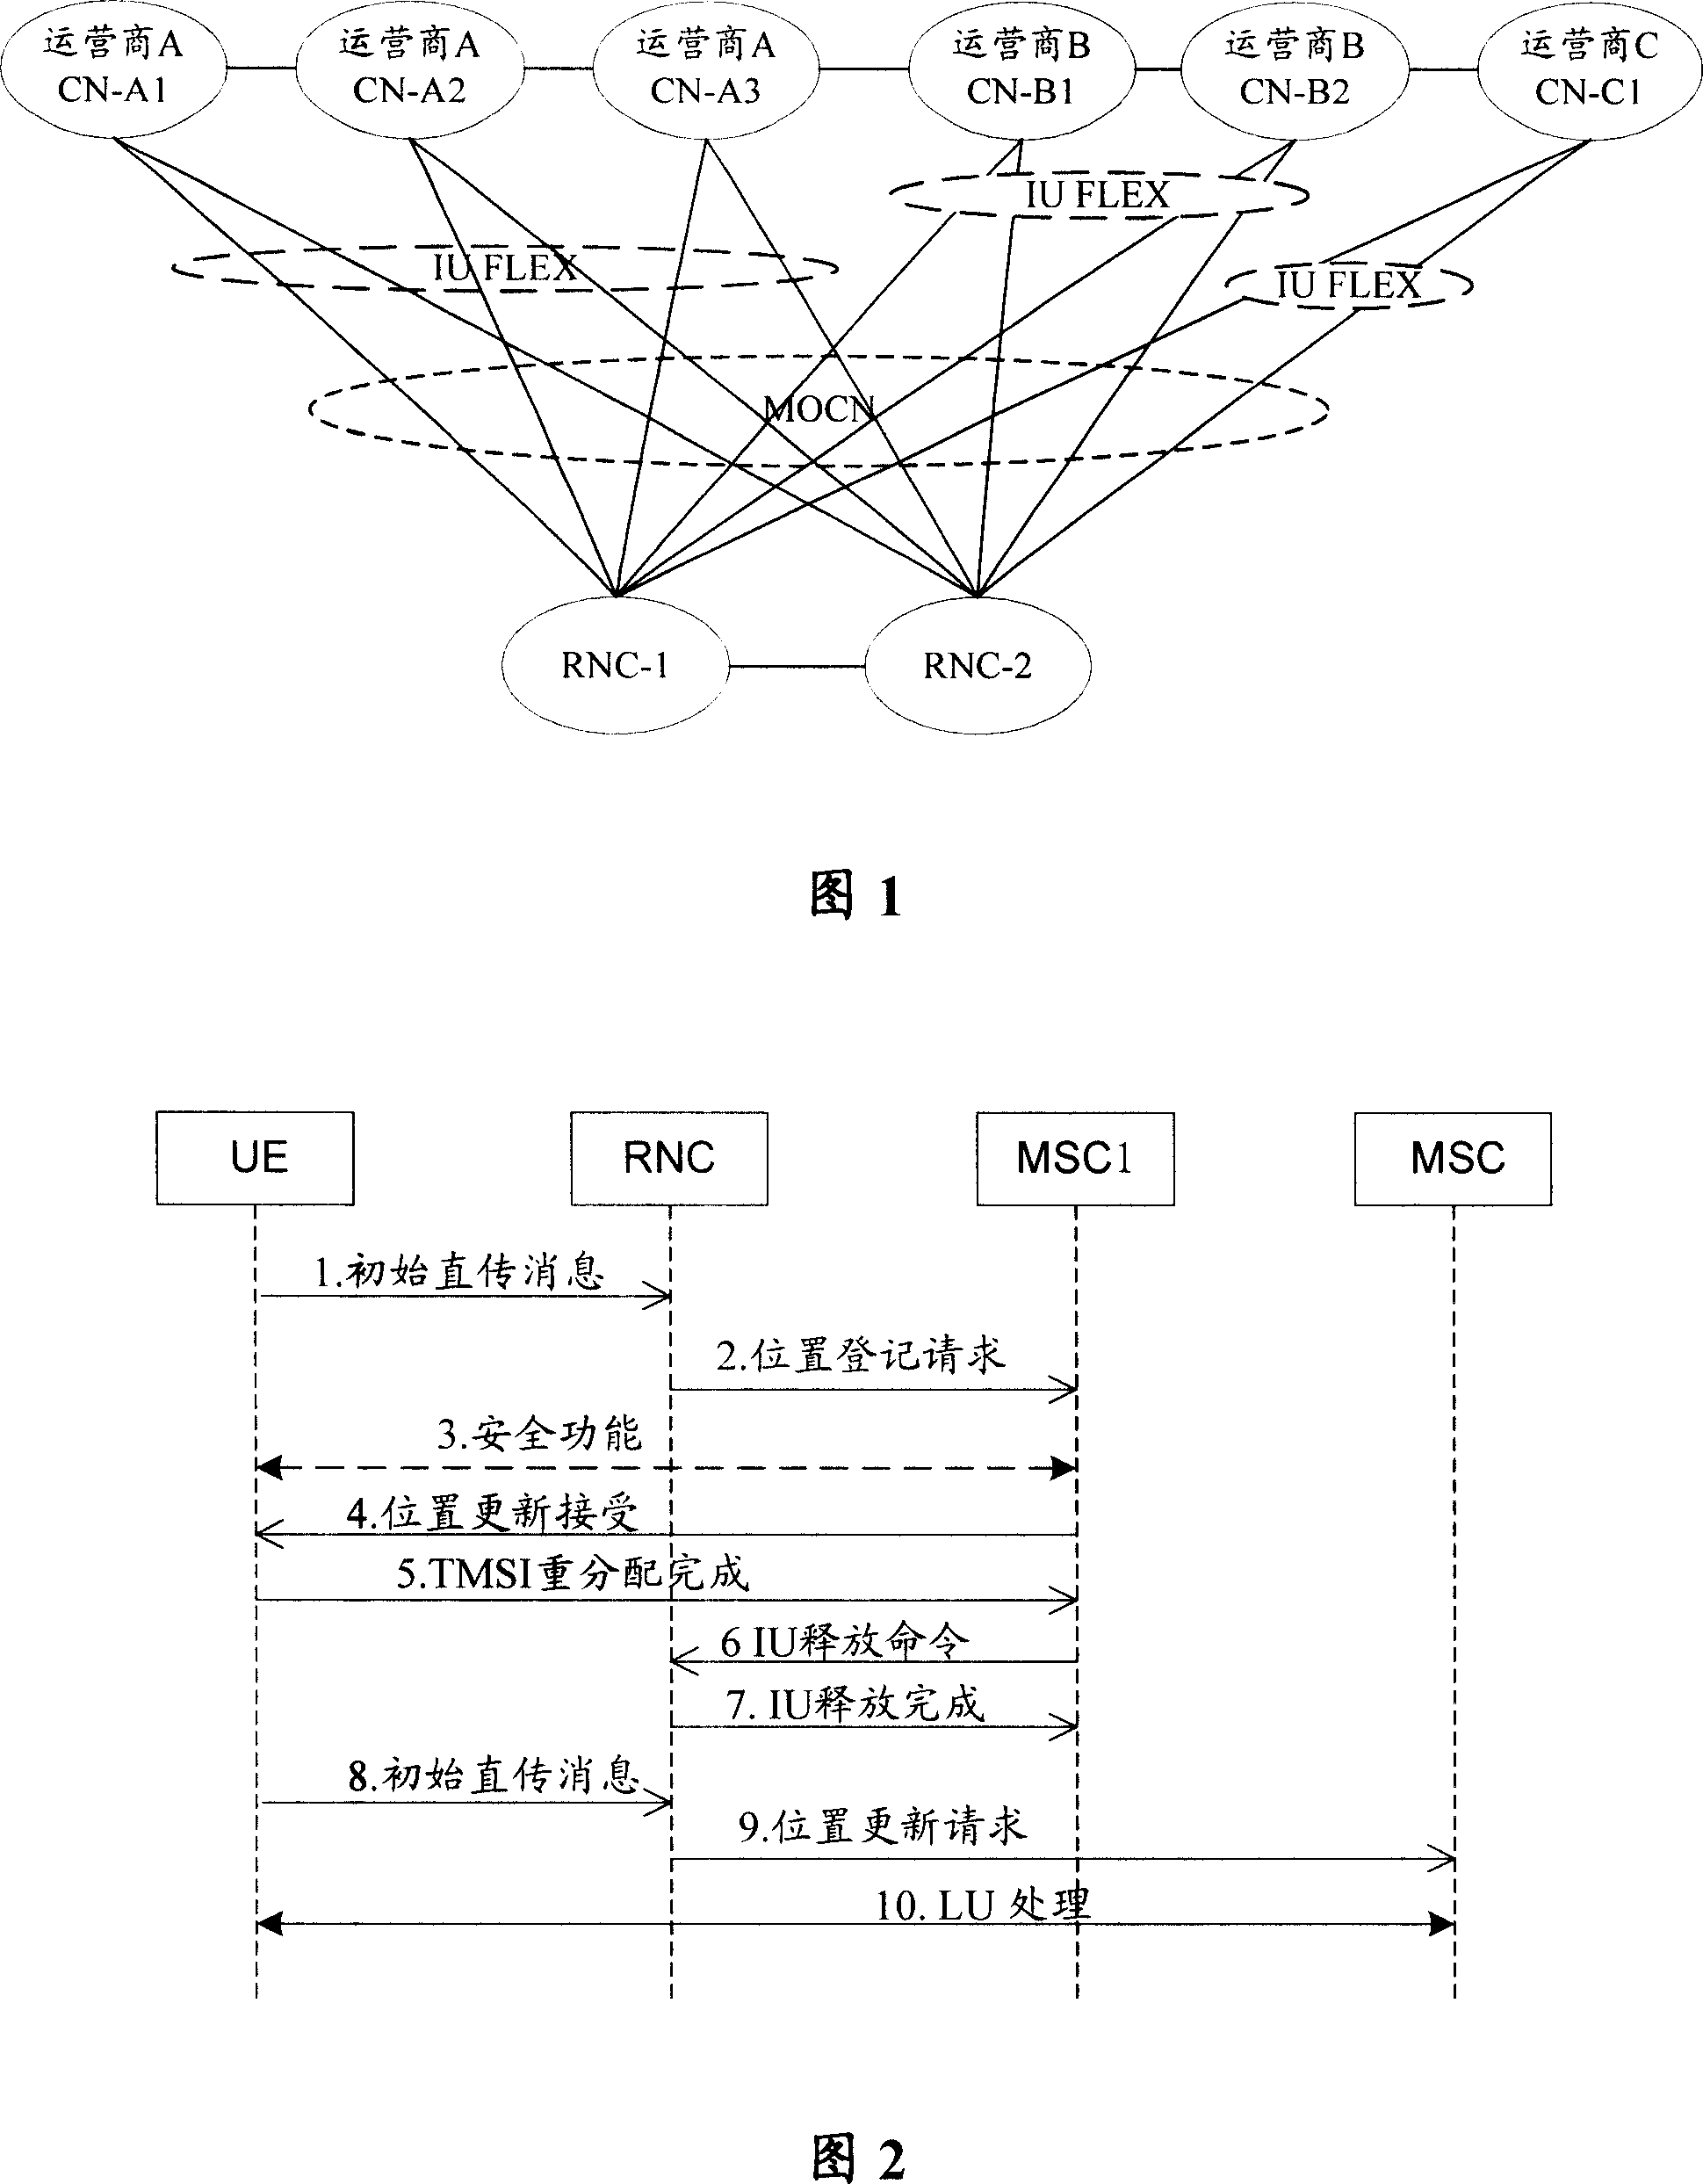 Method for reallocating core network service